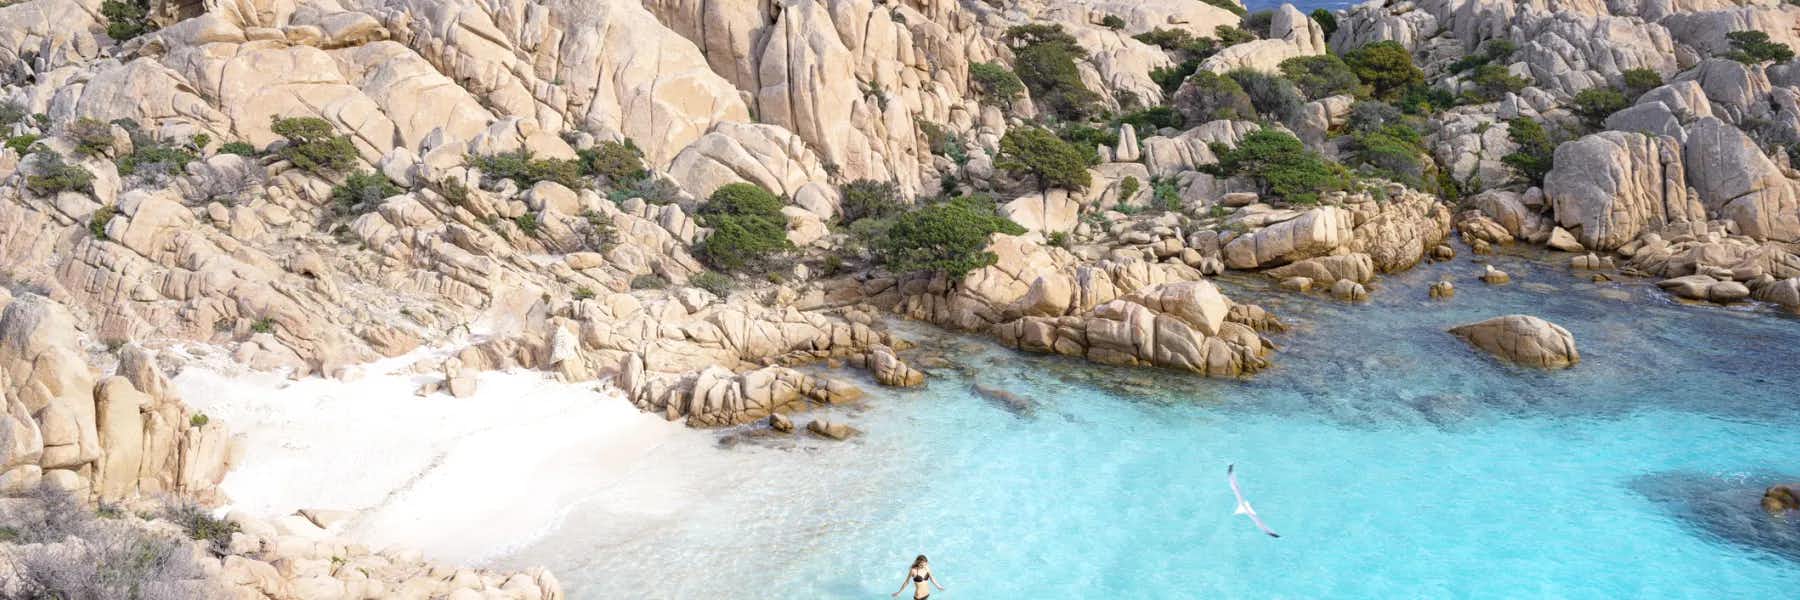 My Favorite Beaches in Italy - 5 of The Best and Most Beautiful Beaches